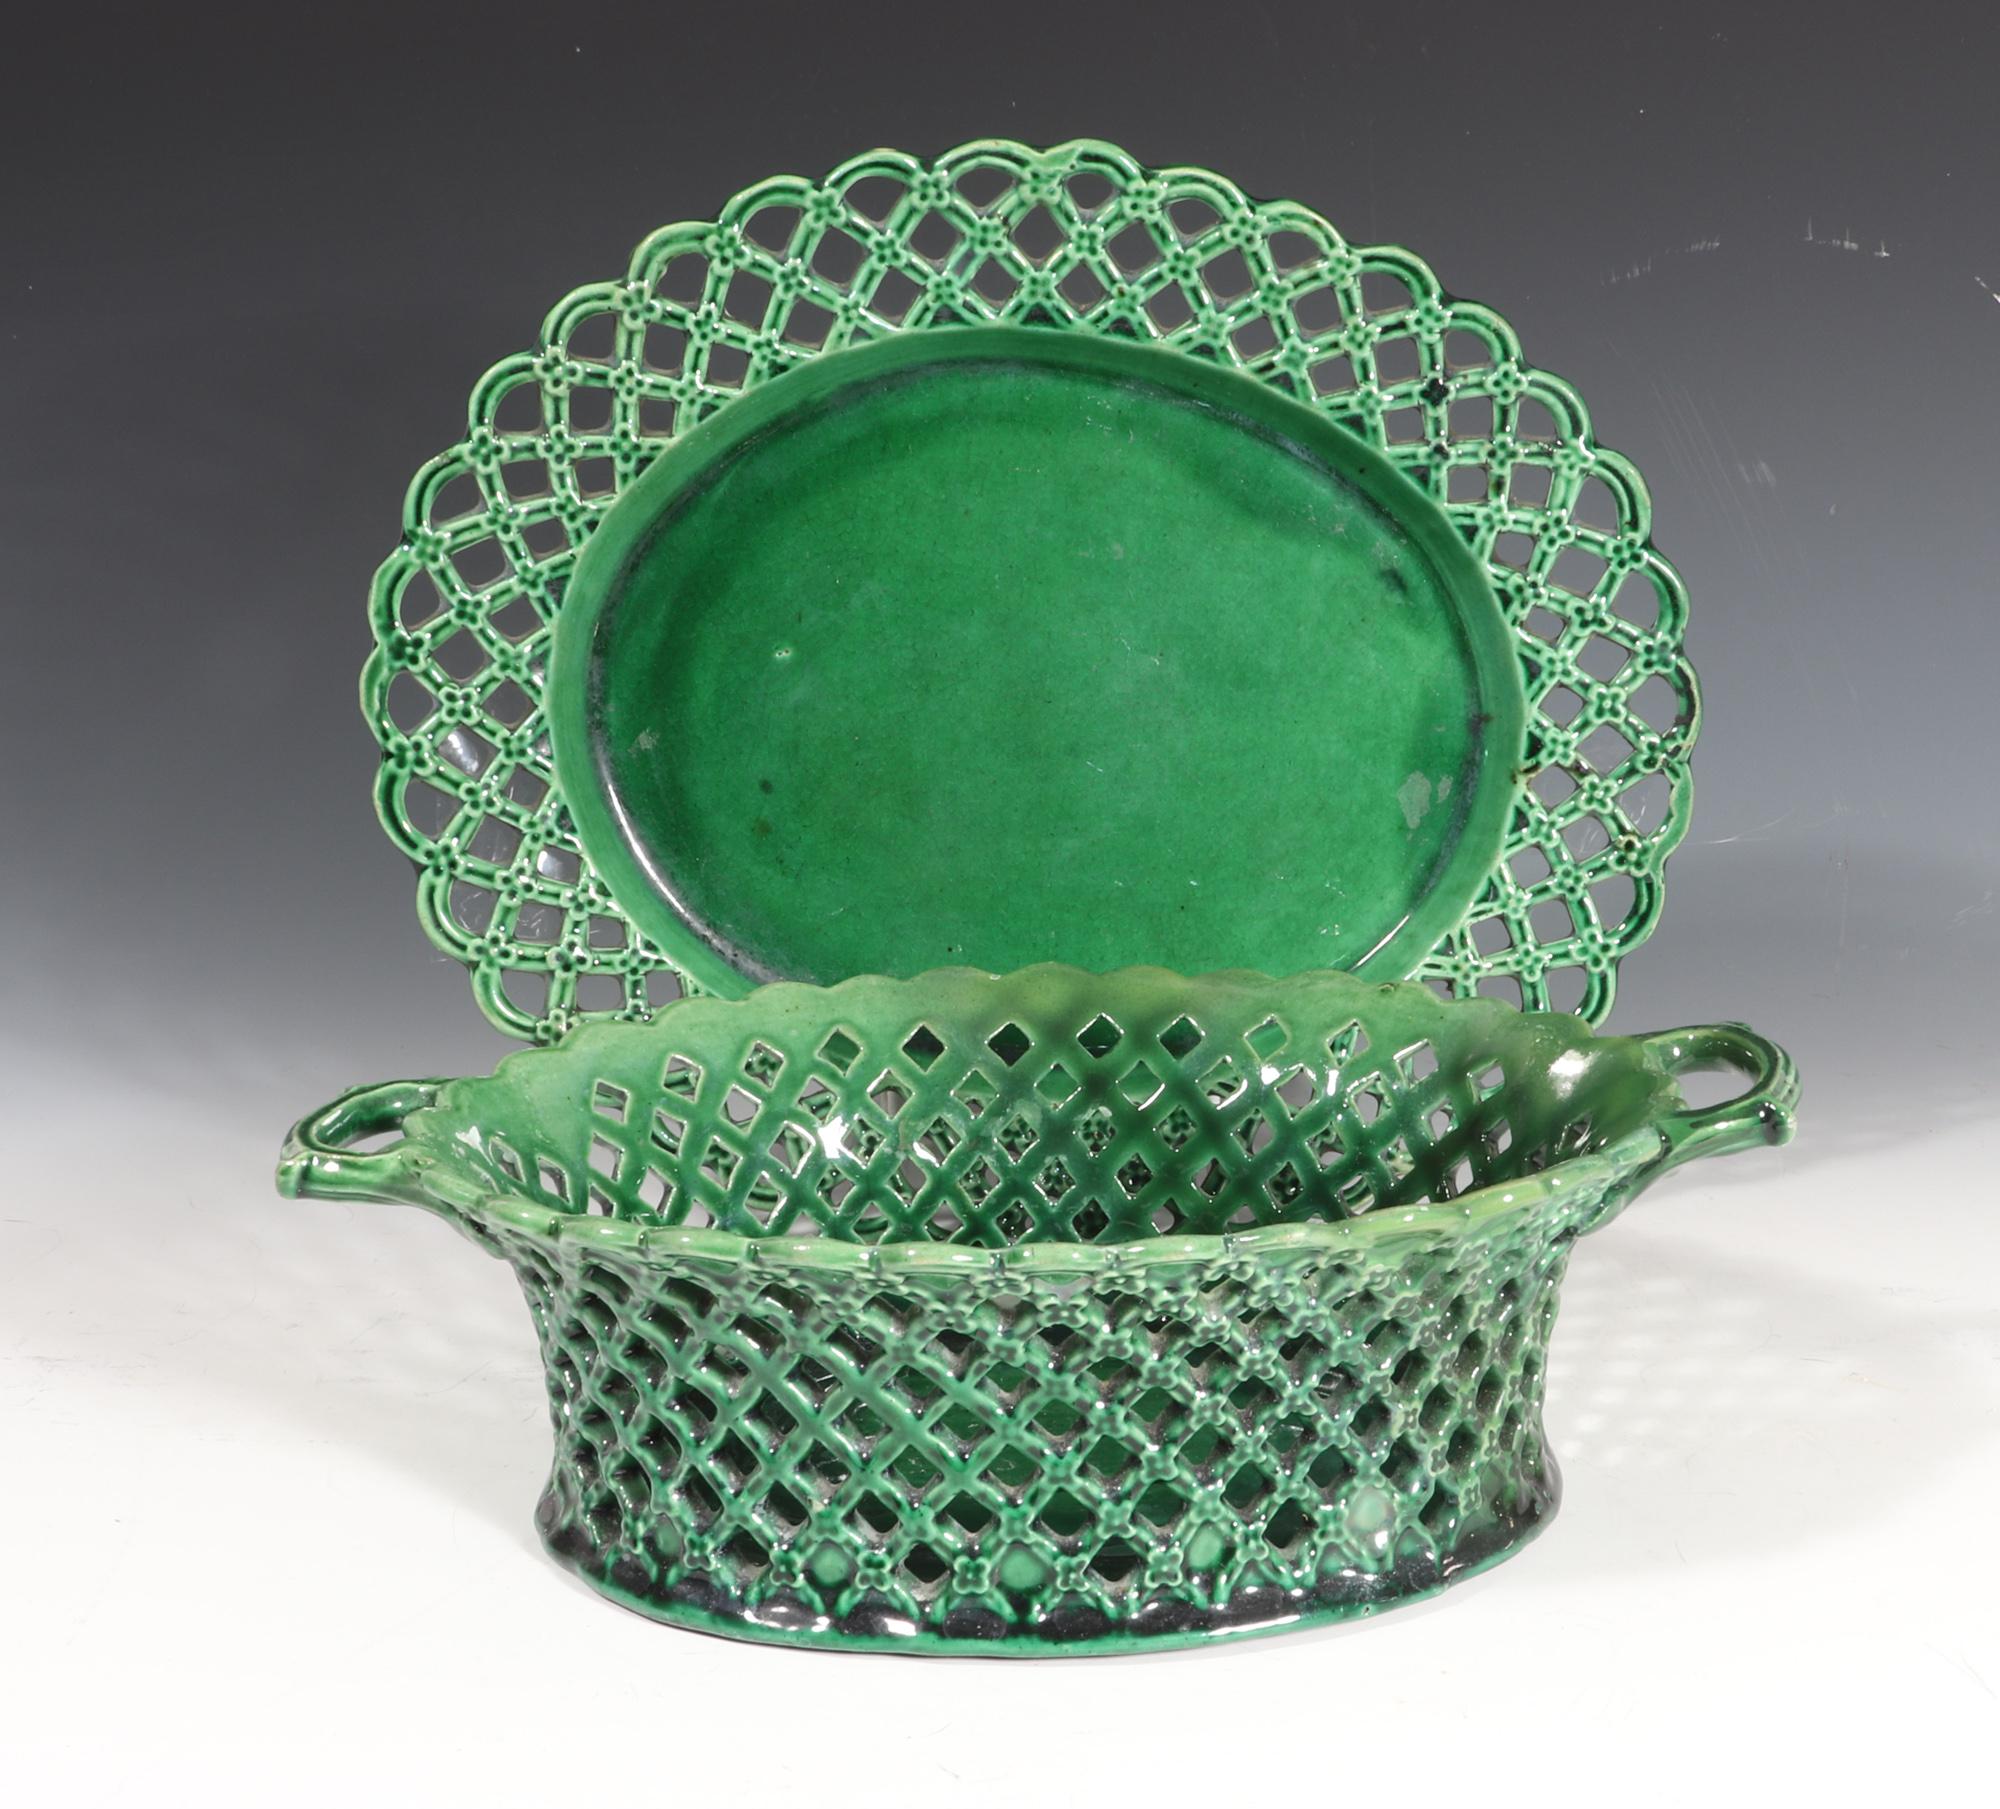 English pottery greenware openwork basket & stand,
1790-1880

The wonderful green-glazed openwork pottery basket and stand are decorated in the form of green-glazed openwork trellis with a molded flower-head at each interception. The rim of the